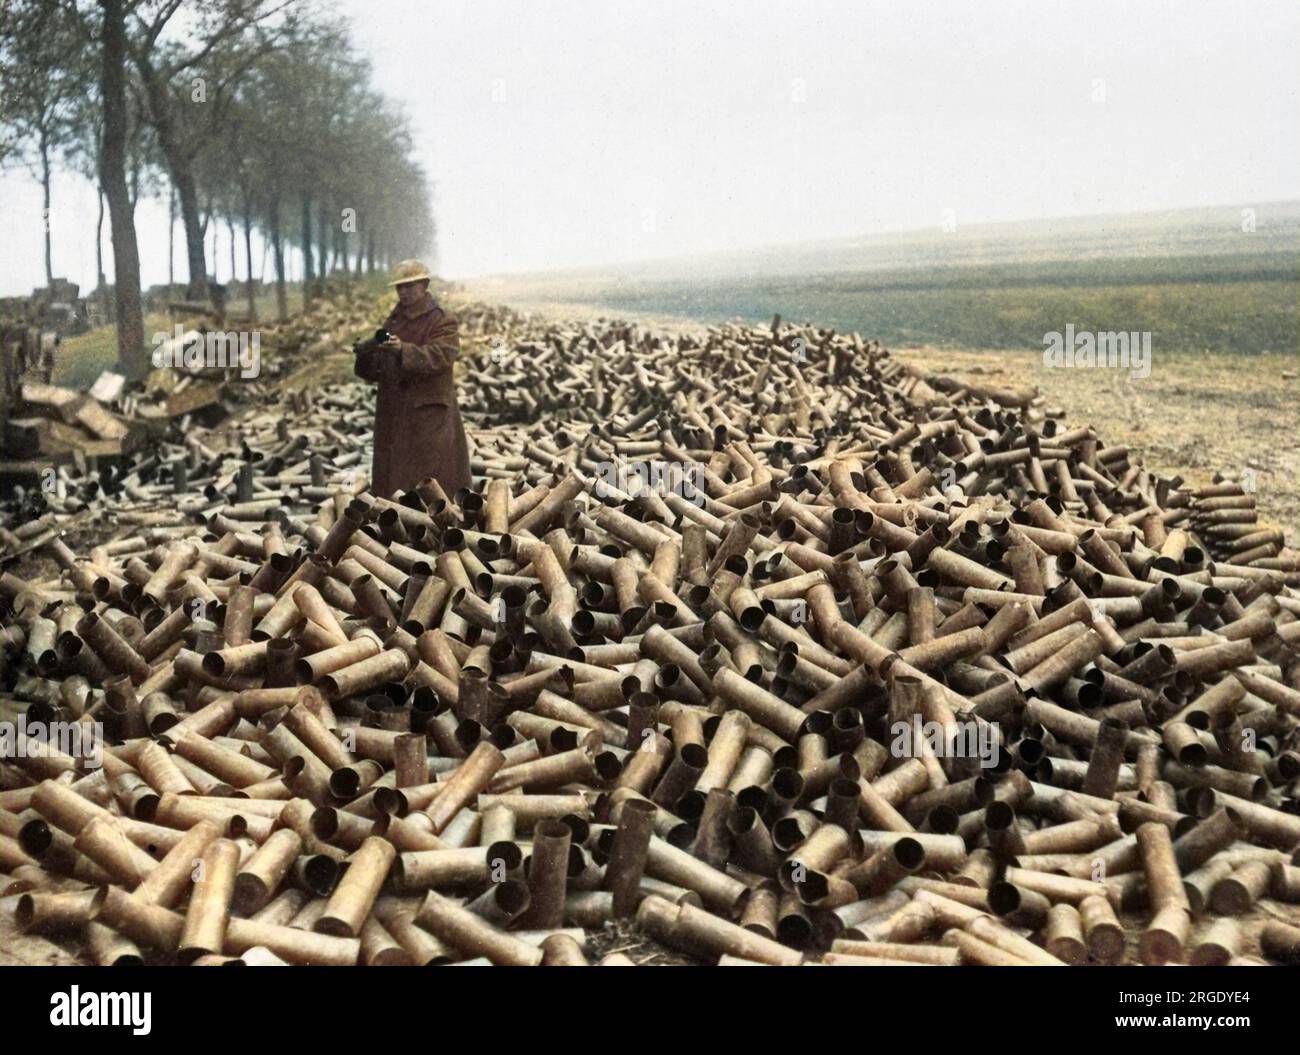 https://c8.alamy.com/comp/2RGDYE4/empty-british-shell-cases-after-their-contents-have-been-fired-on-the-western-front-in-france-during-world-war-one-2RGDYE4.jpg